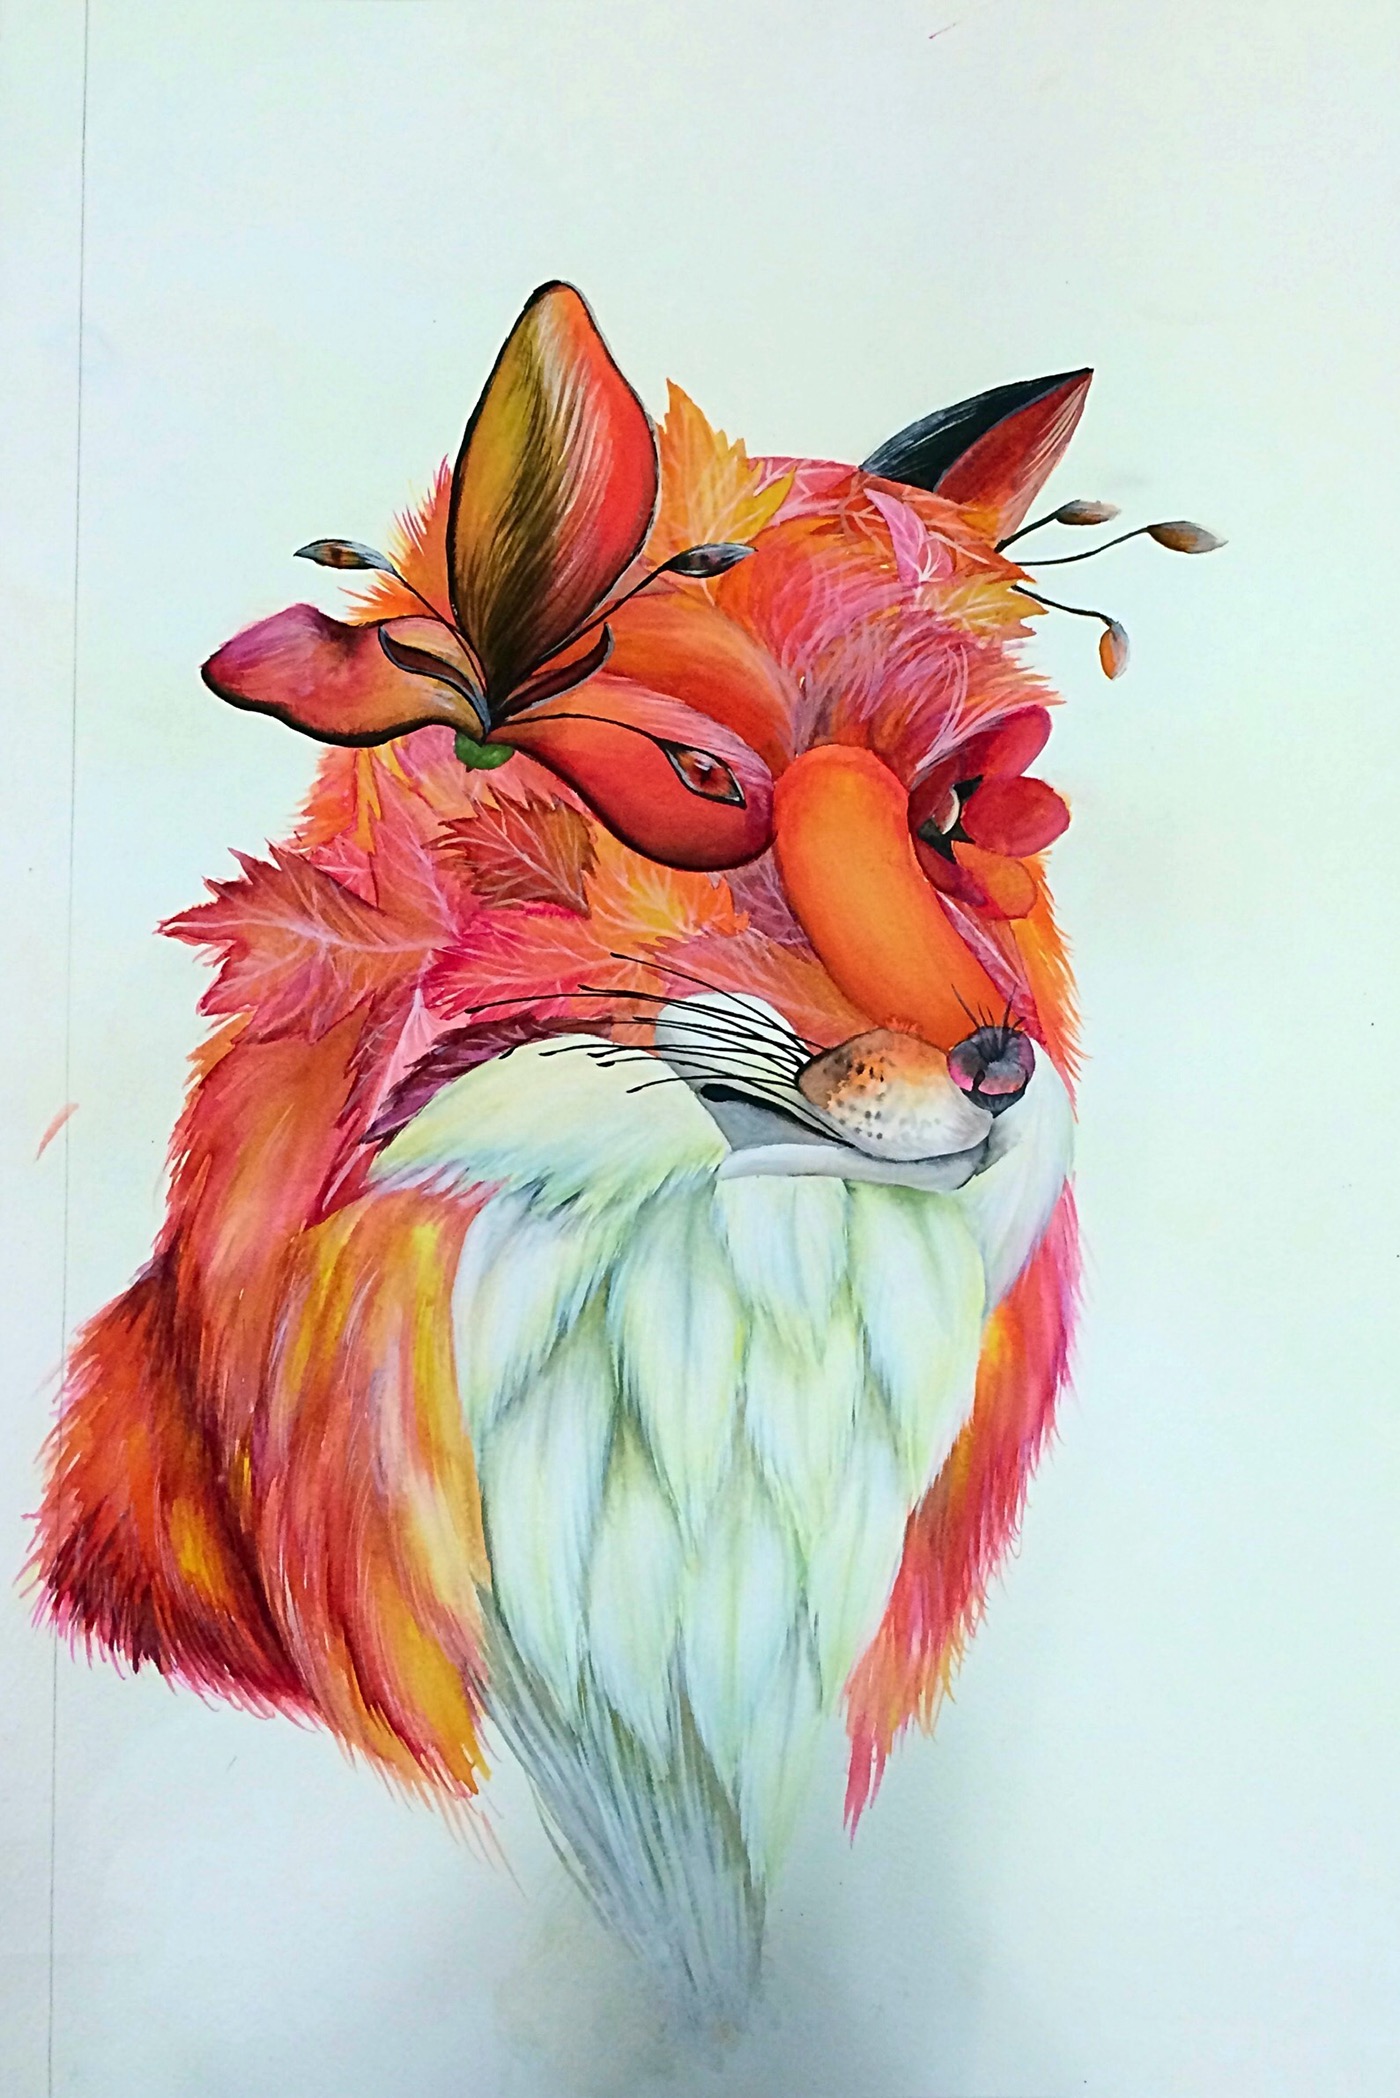 foxes FOX ink Art surrealism Archim Baldo Nature wolf owl Cat Rooster